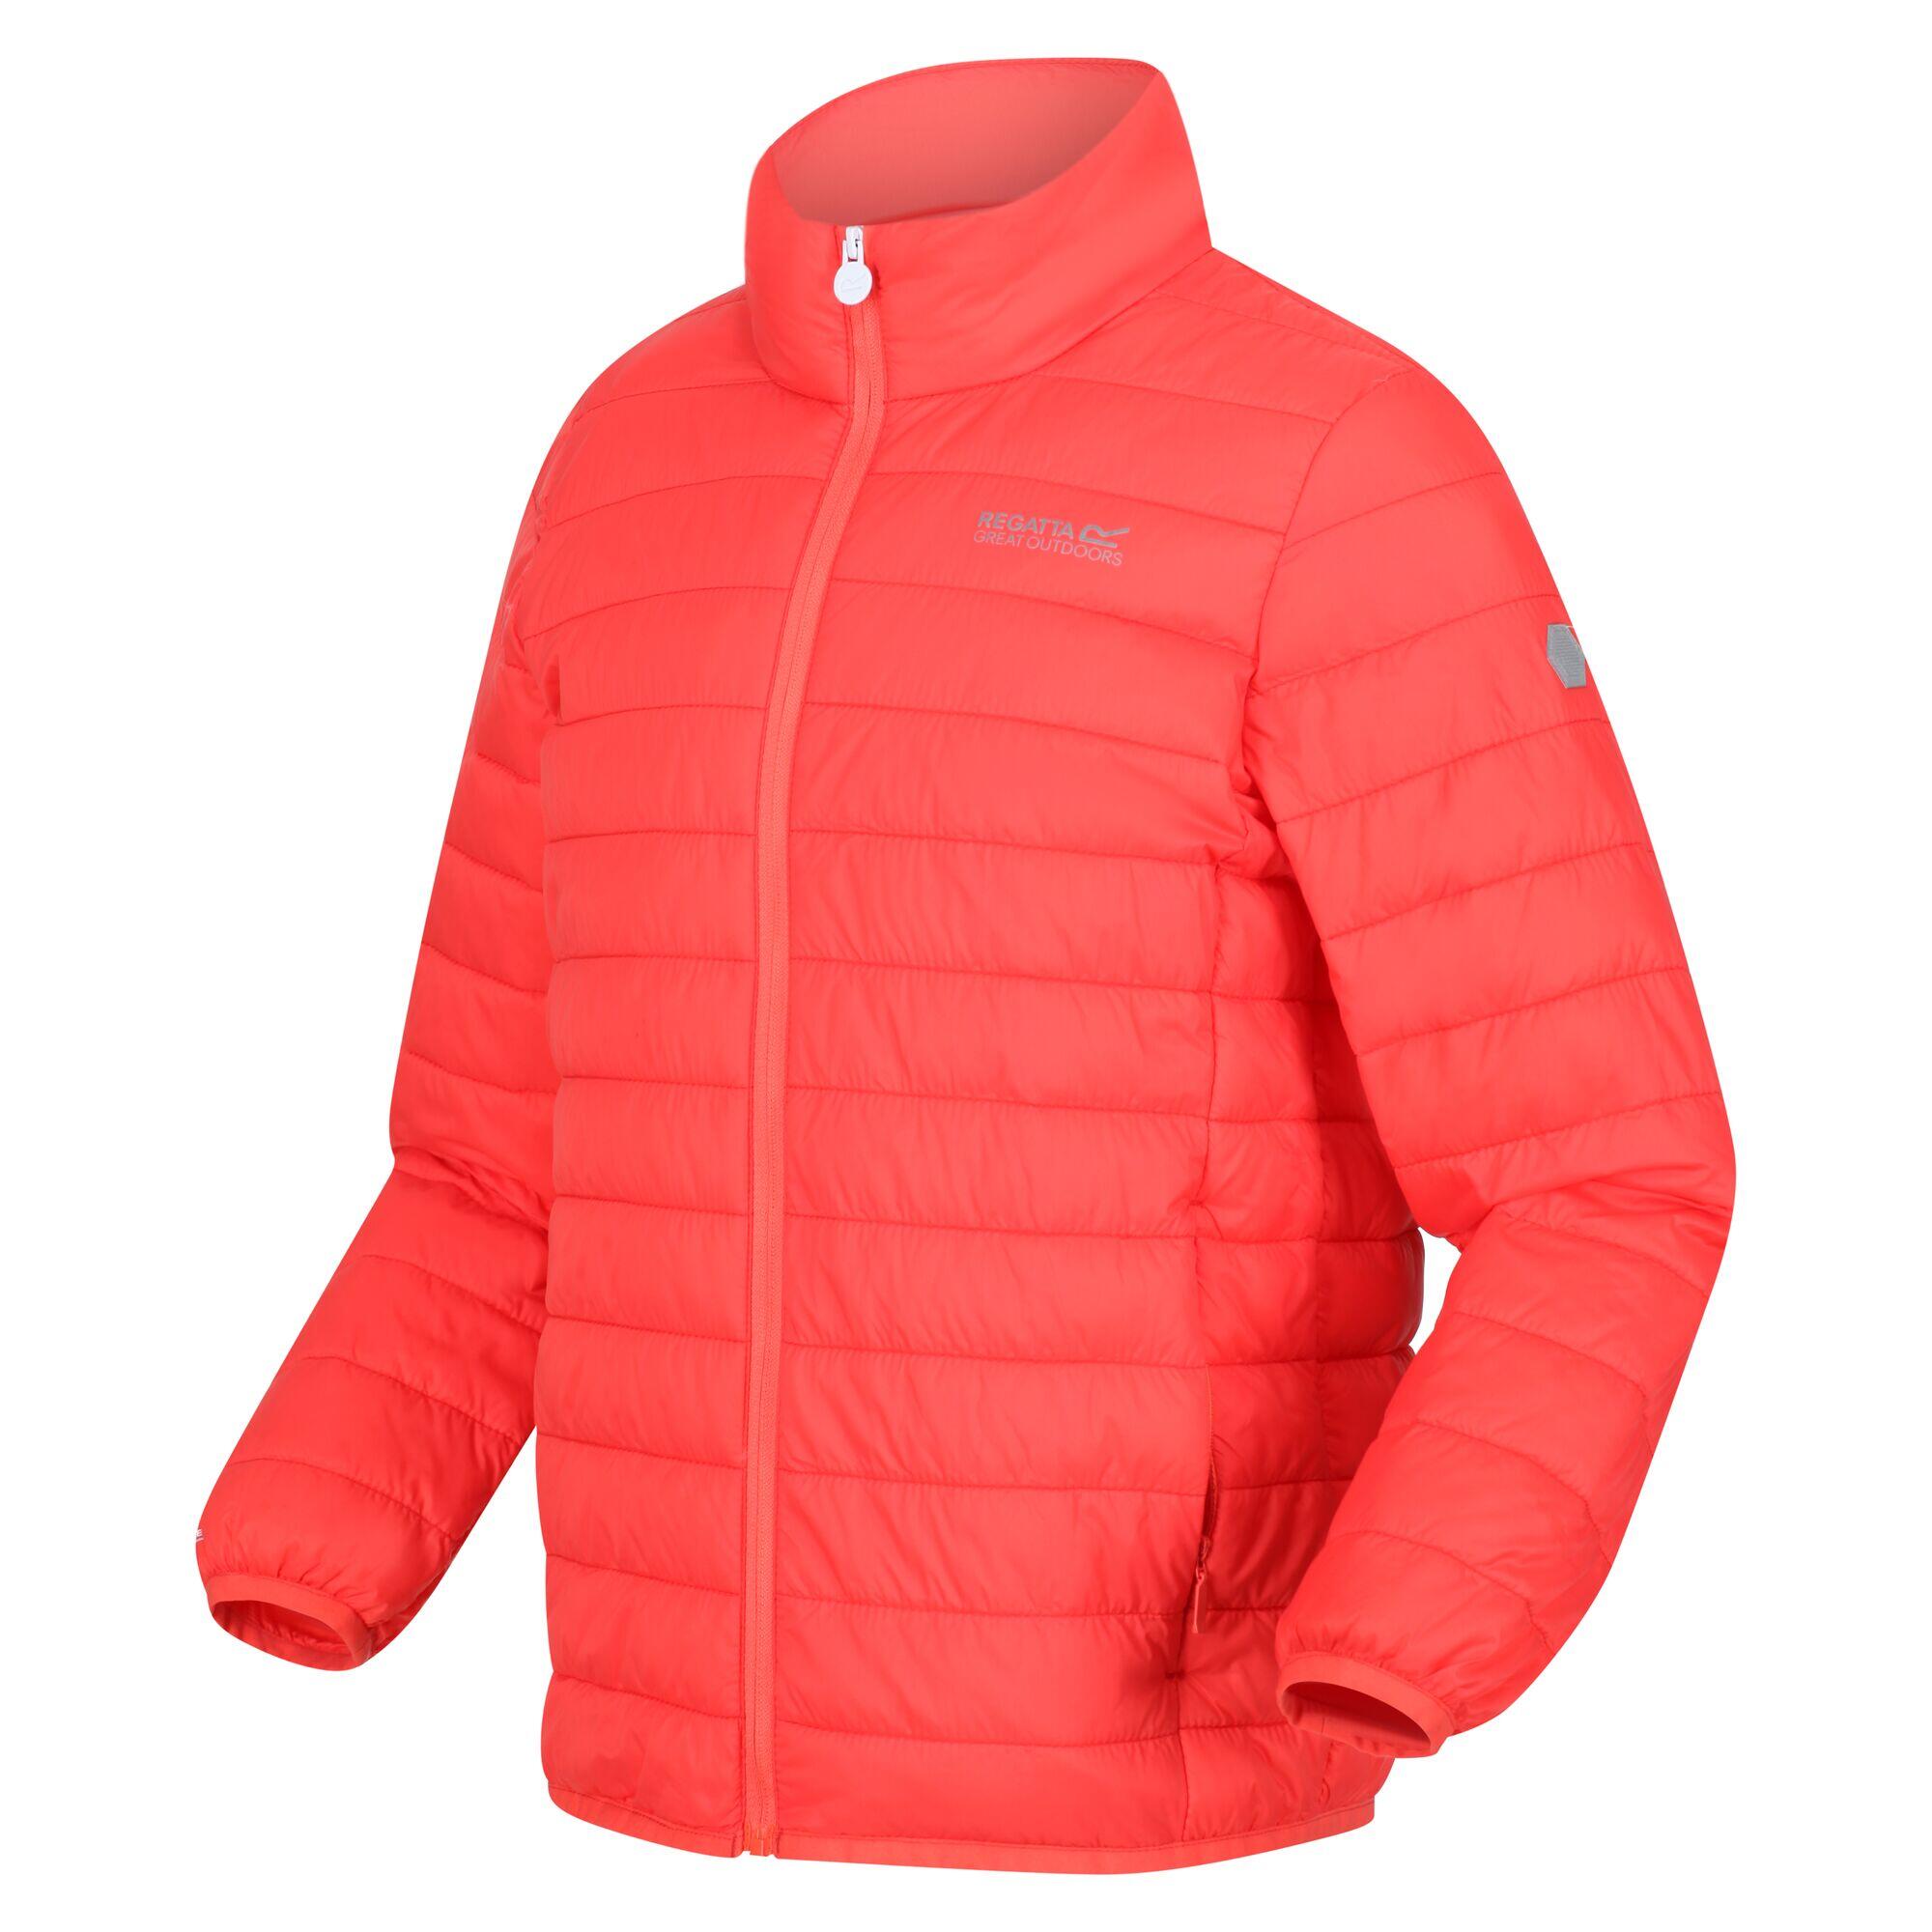 Childrens/Kids Hillpack Quilted Insulated Jacket (Neon Peach) 4/5